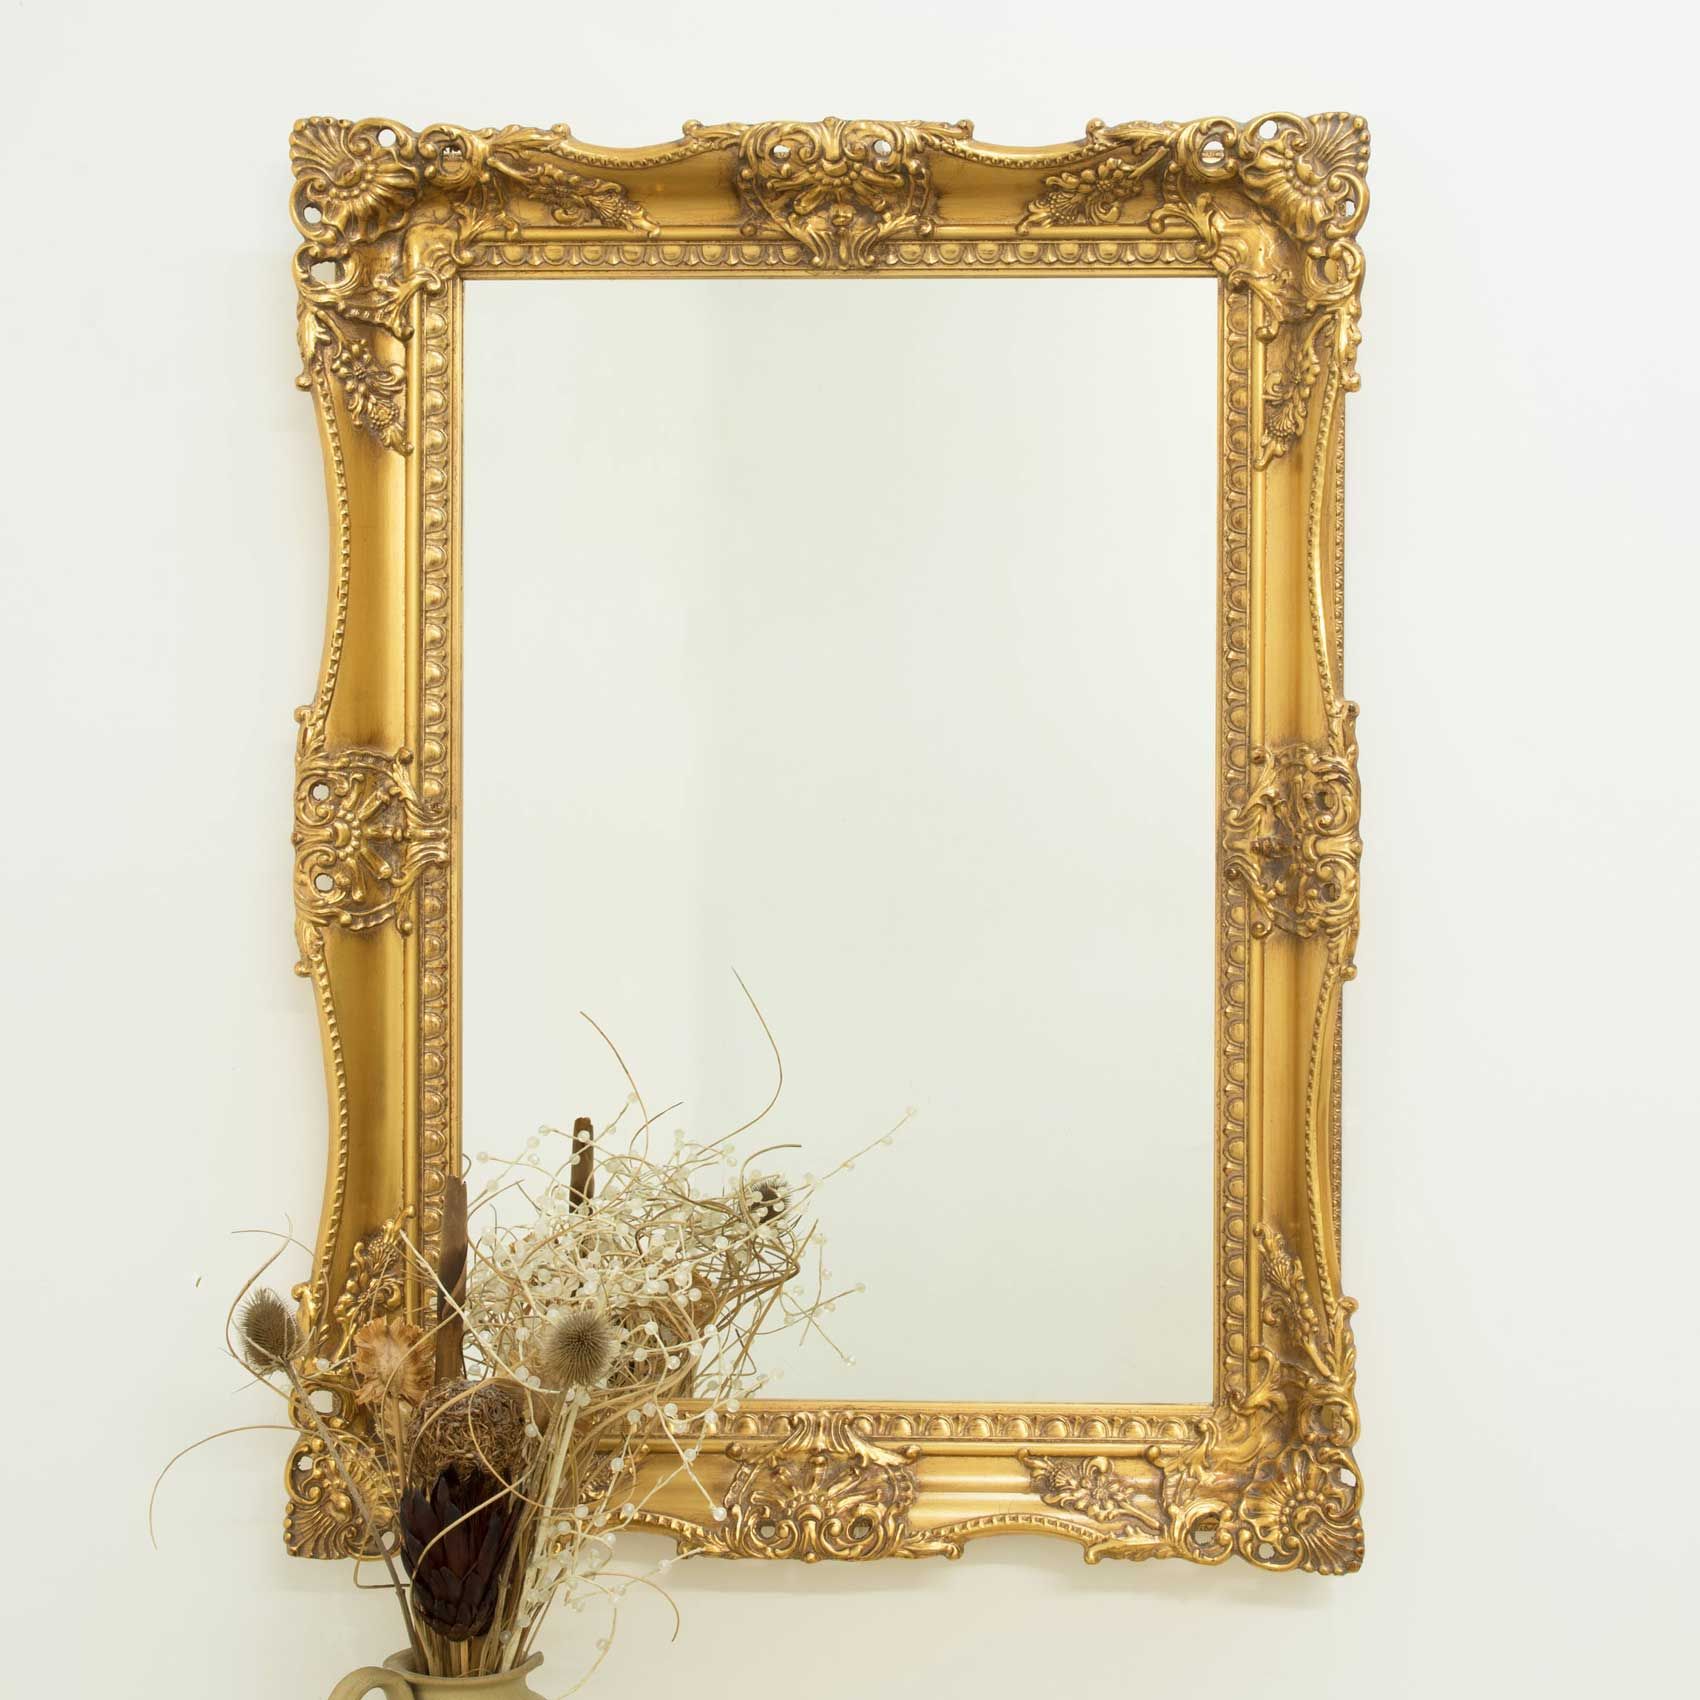 Extra Large Gold Ornate Vintage Wall Mirror 3ft1 X 2ft3, 94cm X 68cm Throughout Antique Aluminum Wall Mirrors (View 12 of 15)